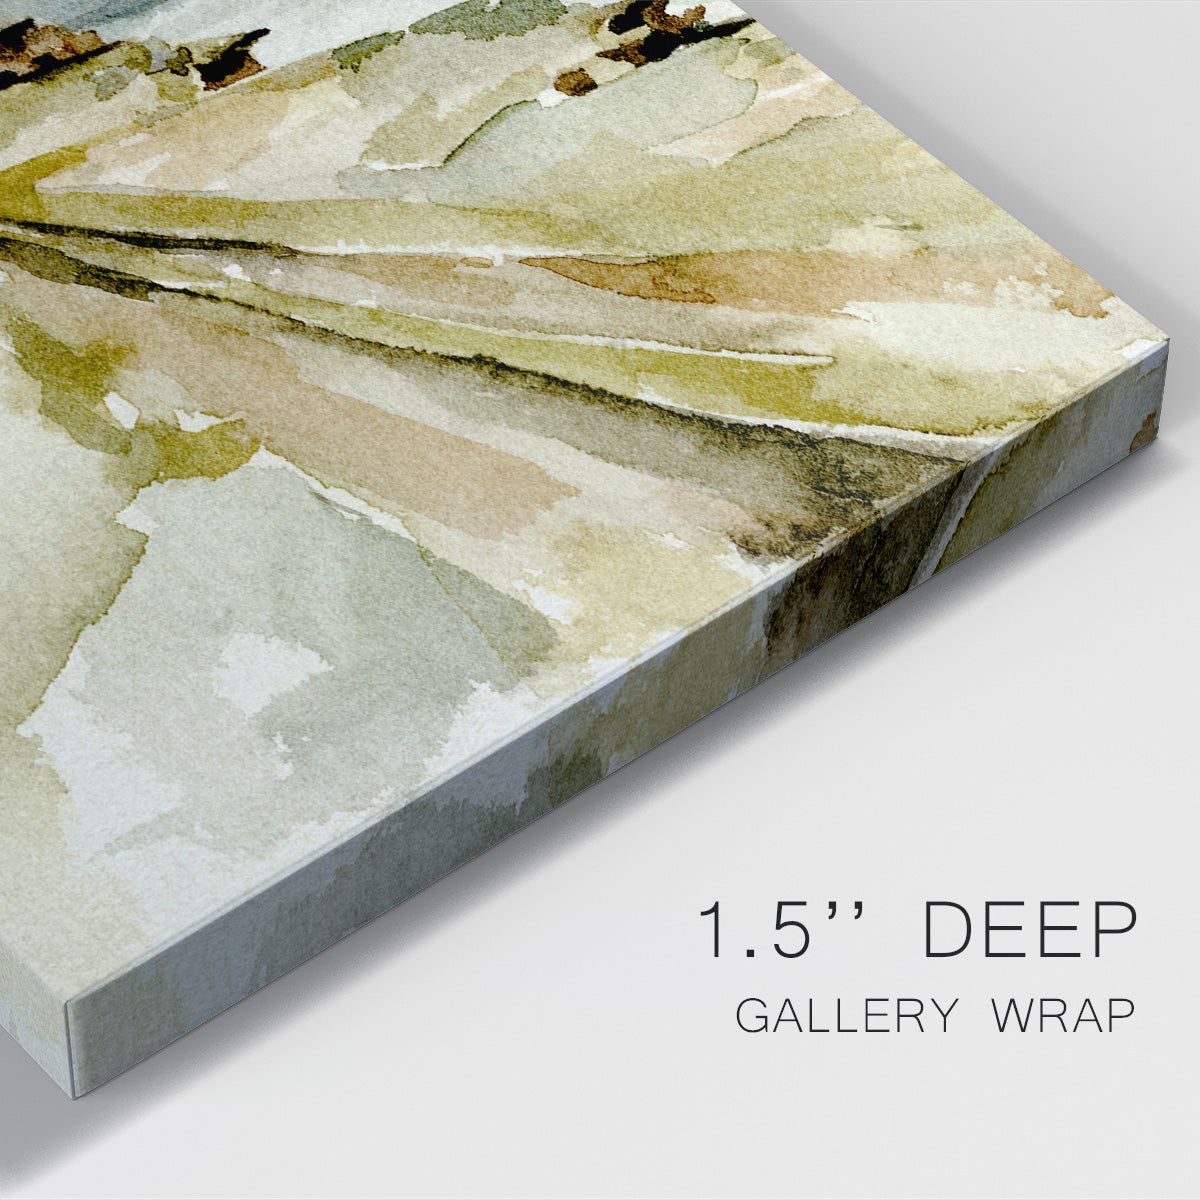 North Sea Coast I Premium Gallery Wrapped Canvas - Ready to Hang